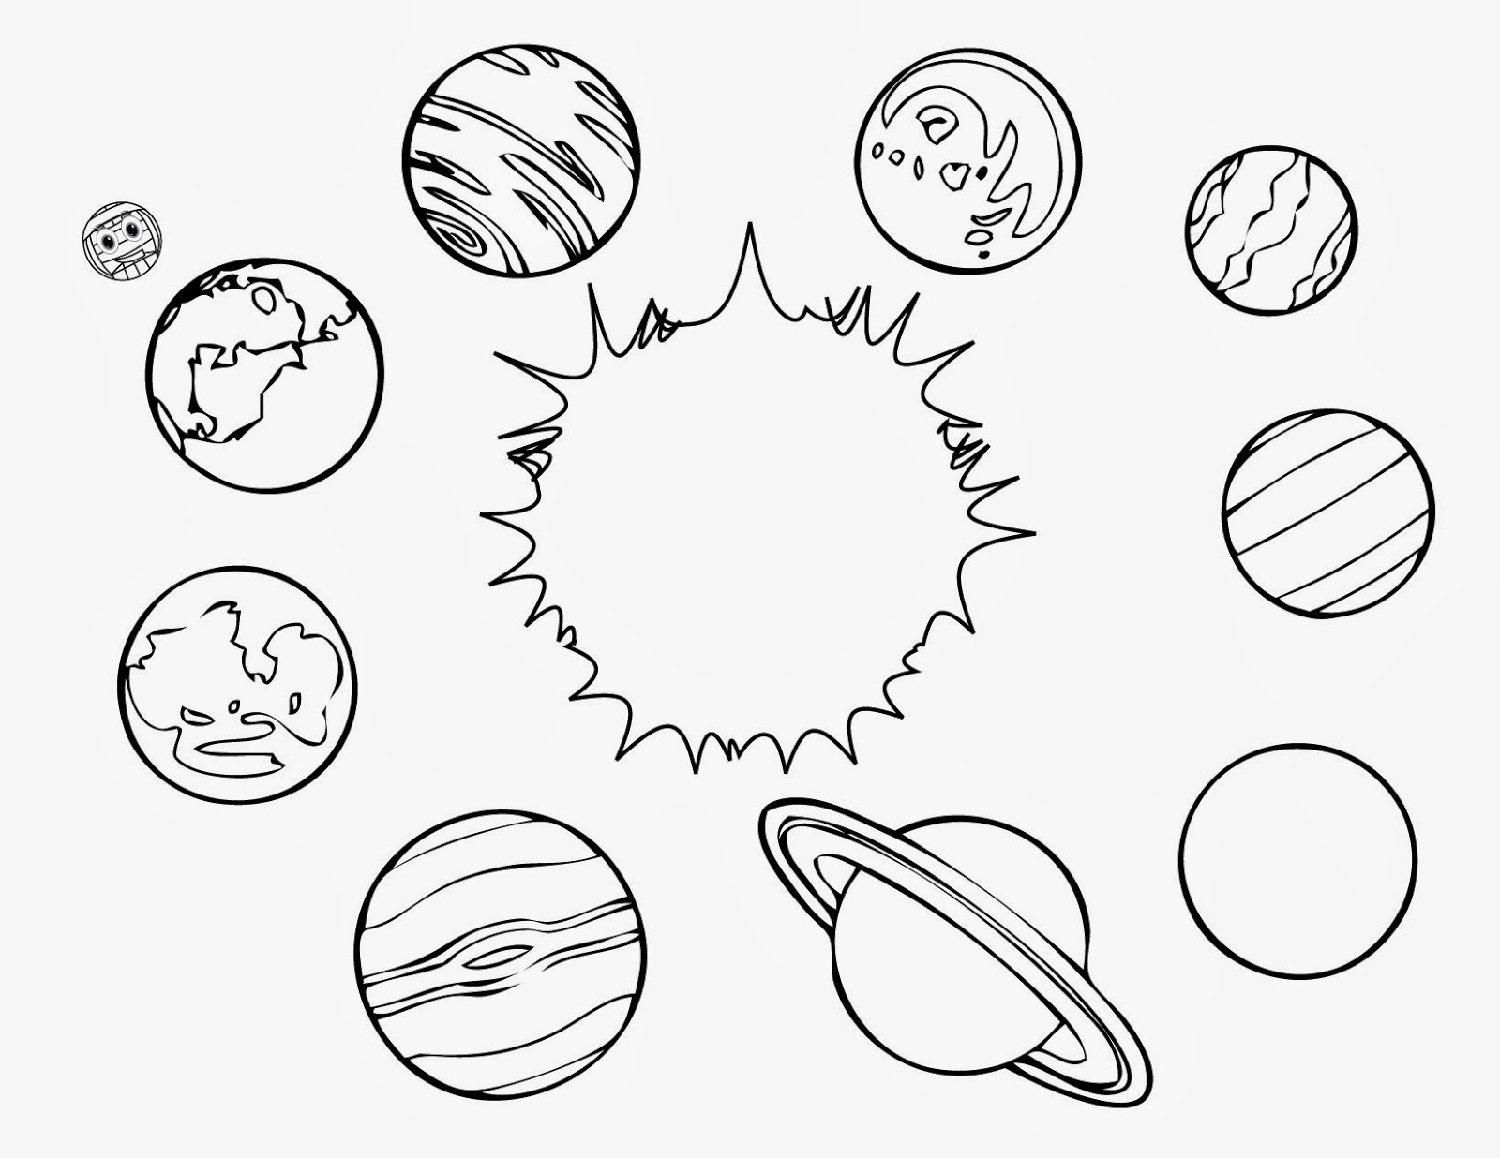 outer-space-worksheets-planets